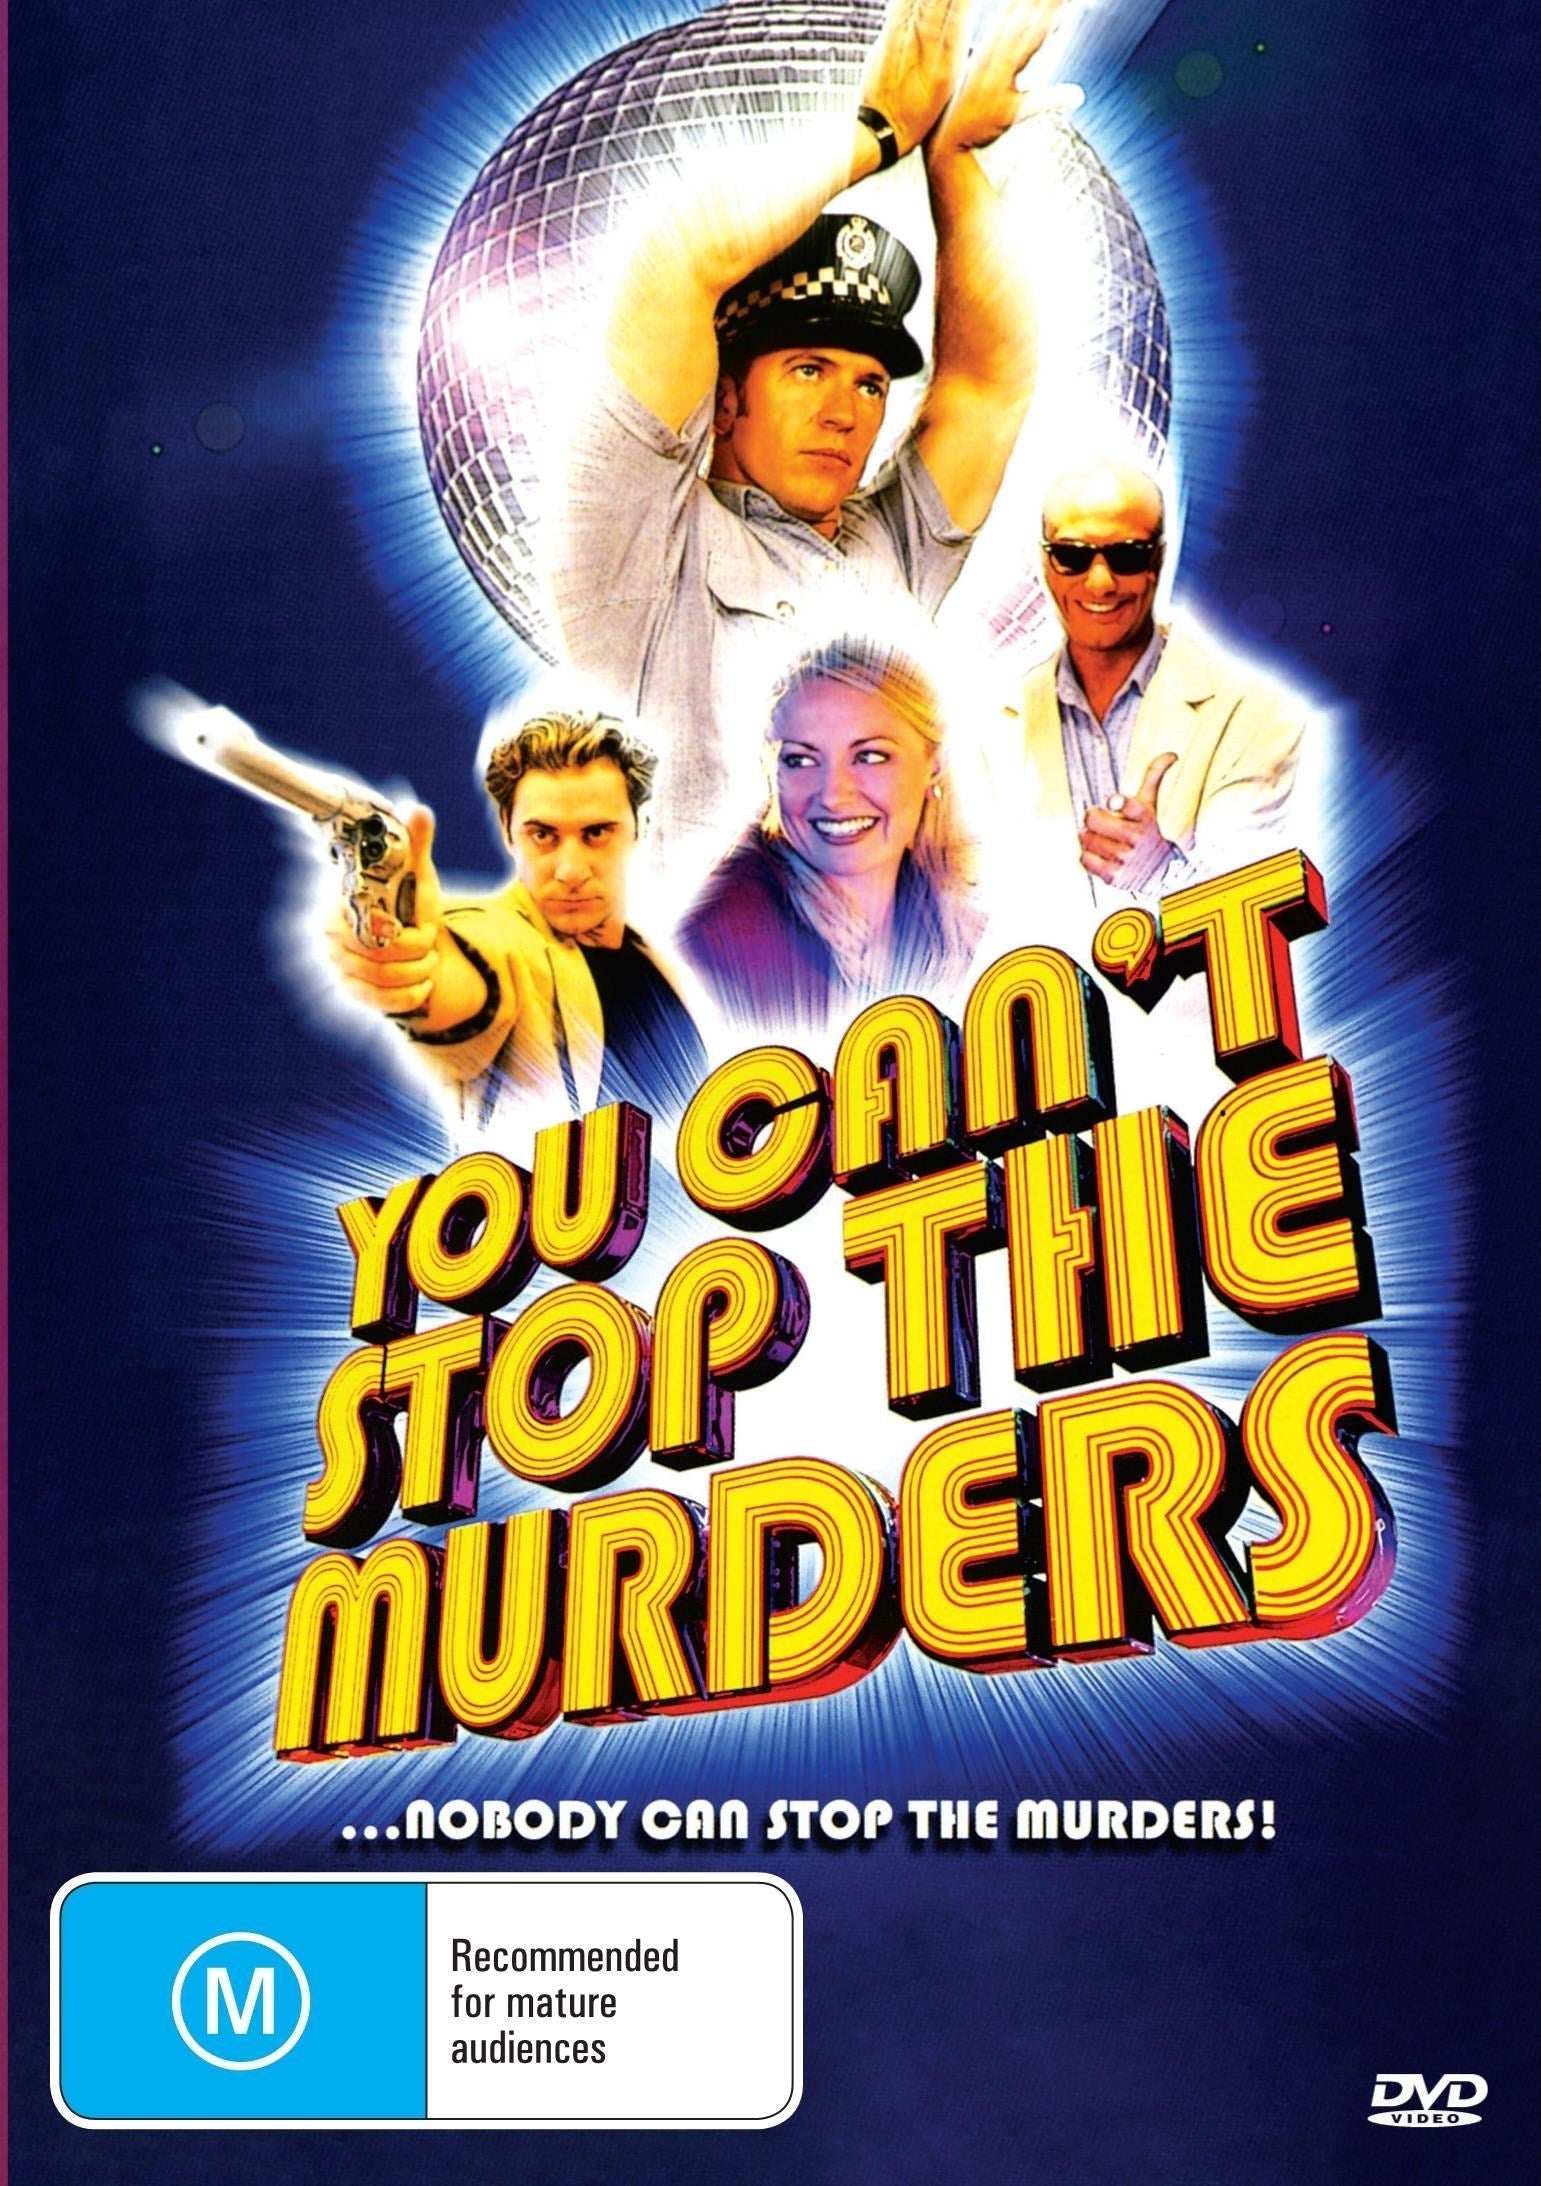 You Can't Stop The Murders rareandcollectibledvds